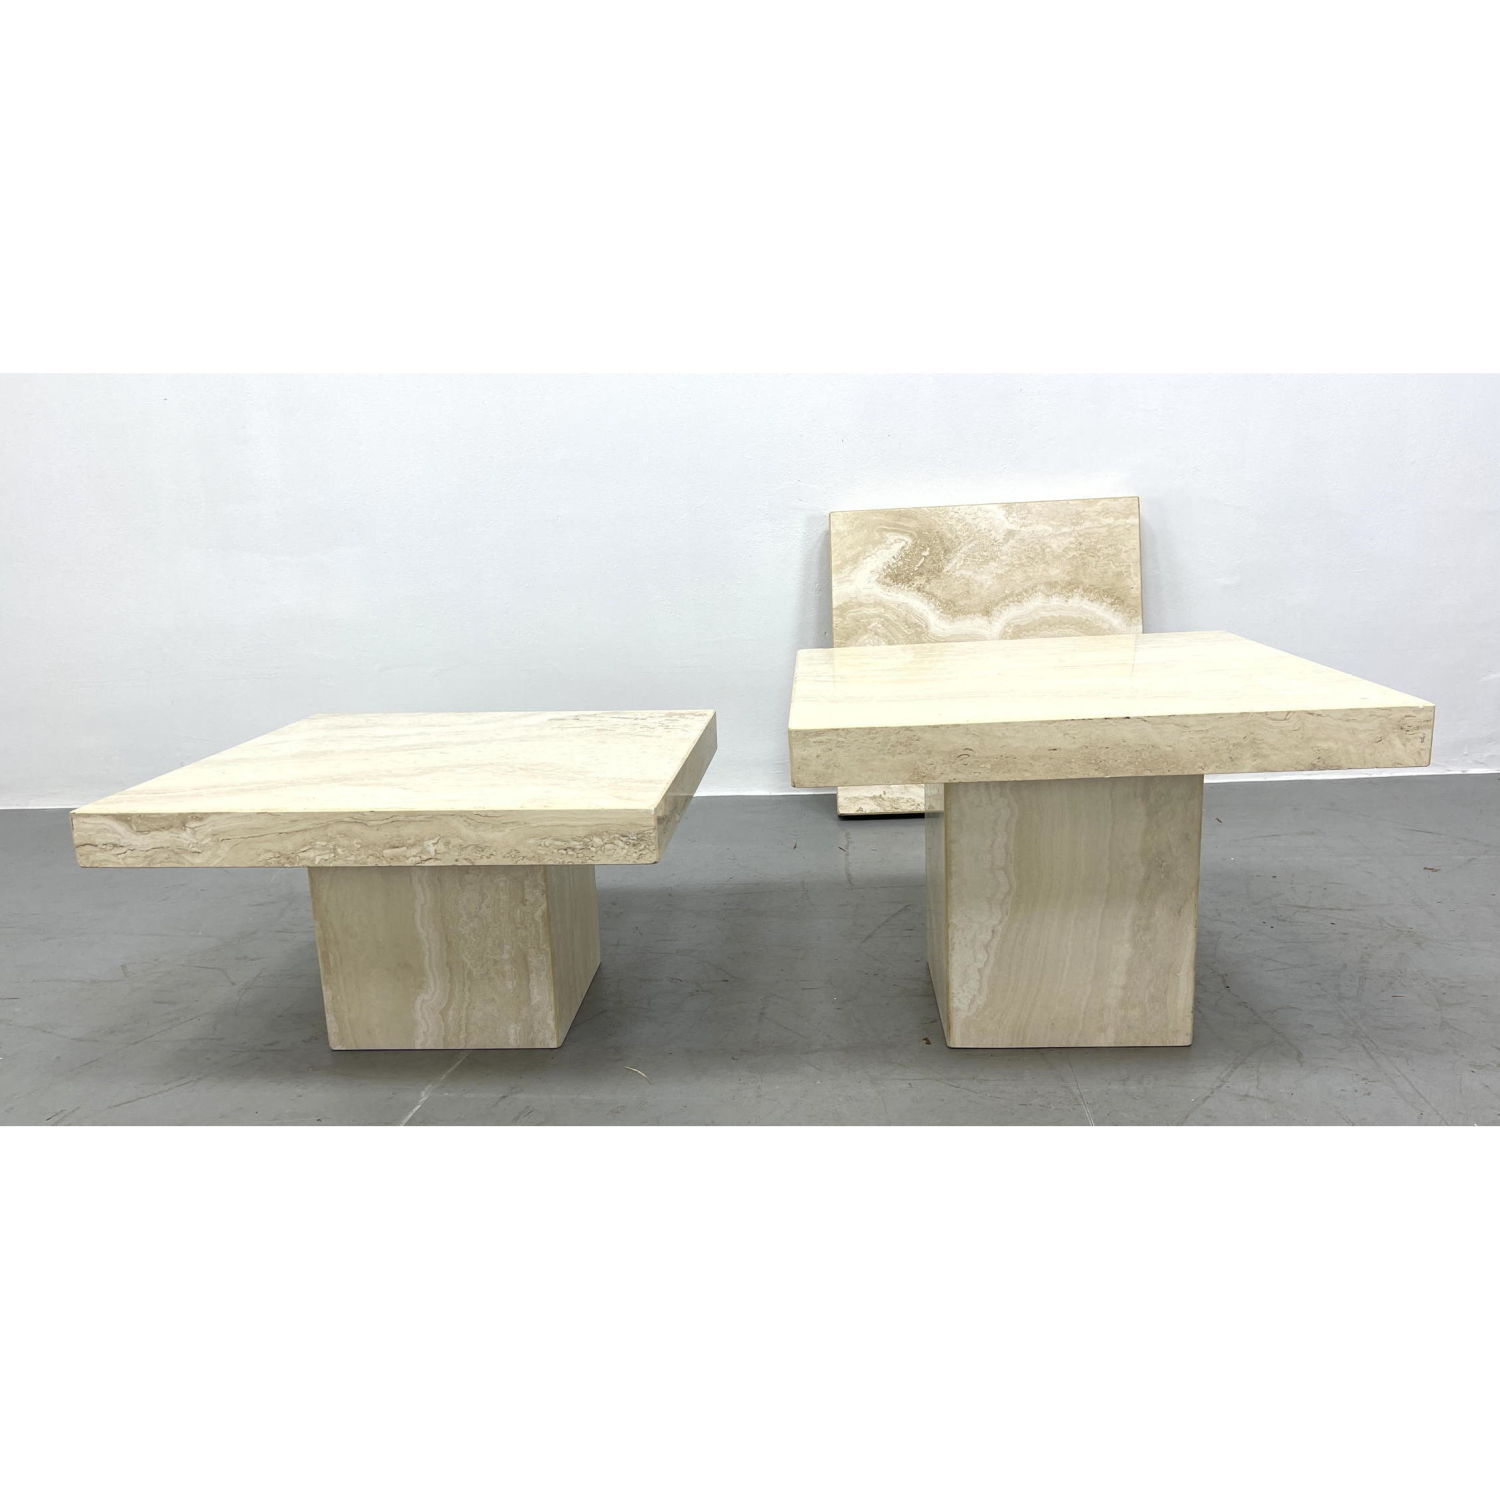 2pc Travertine Marble Side Tables